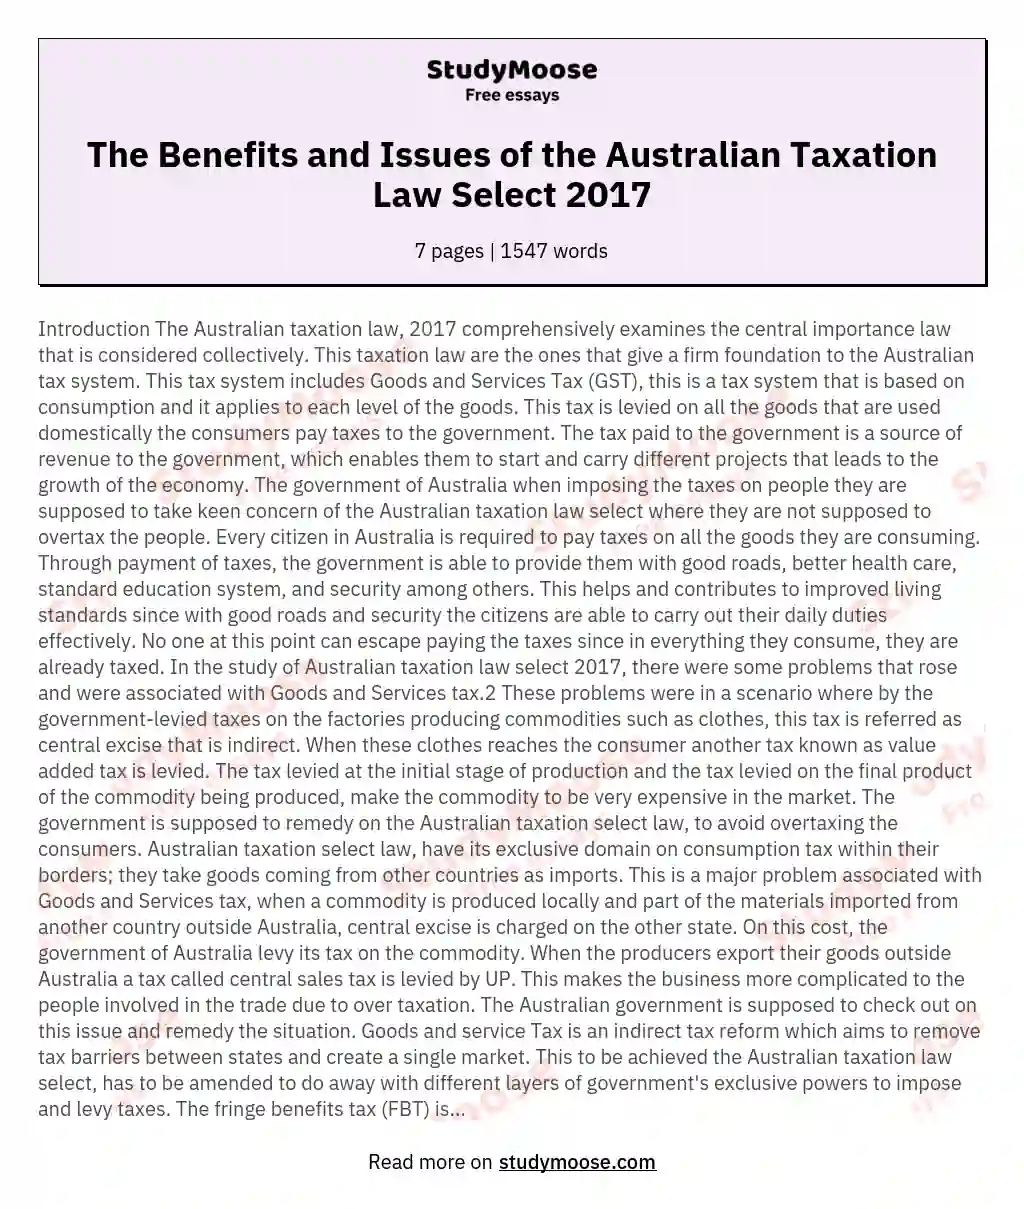 The Benefits and Issues of the Australian Taxation Law Select 2017 essay